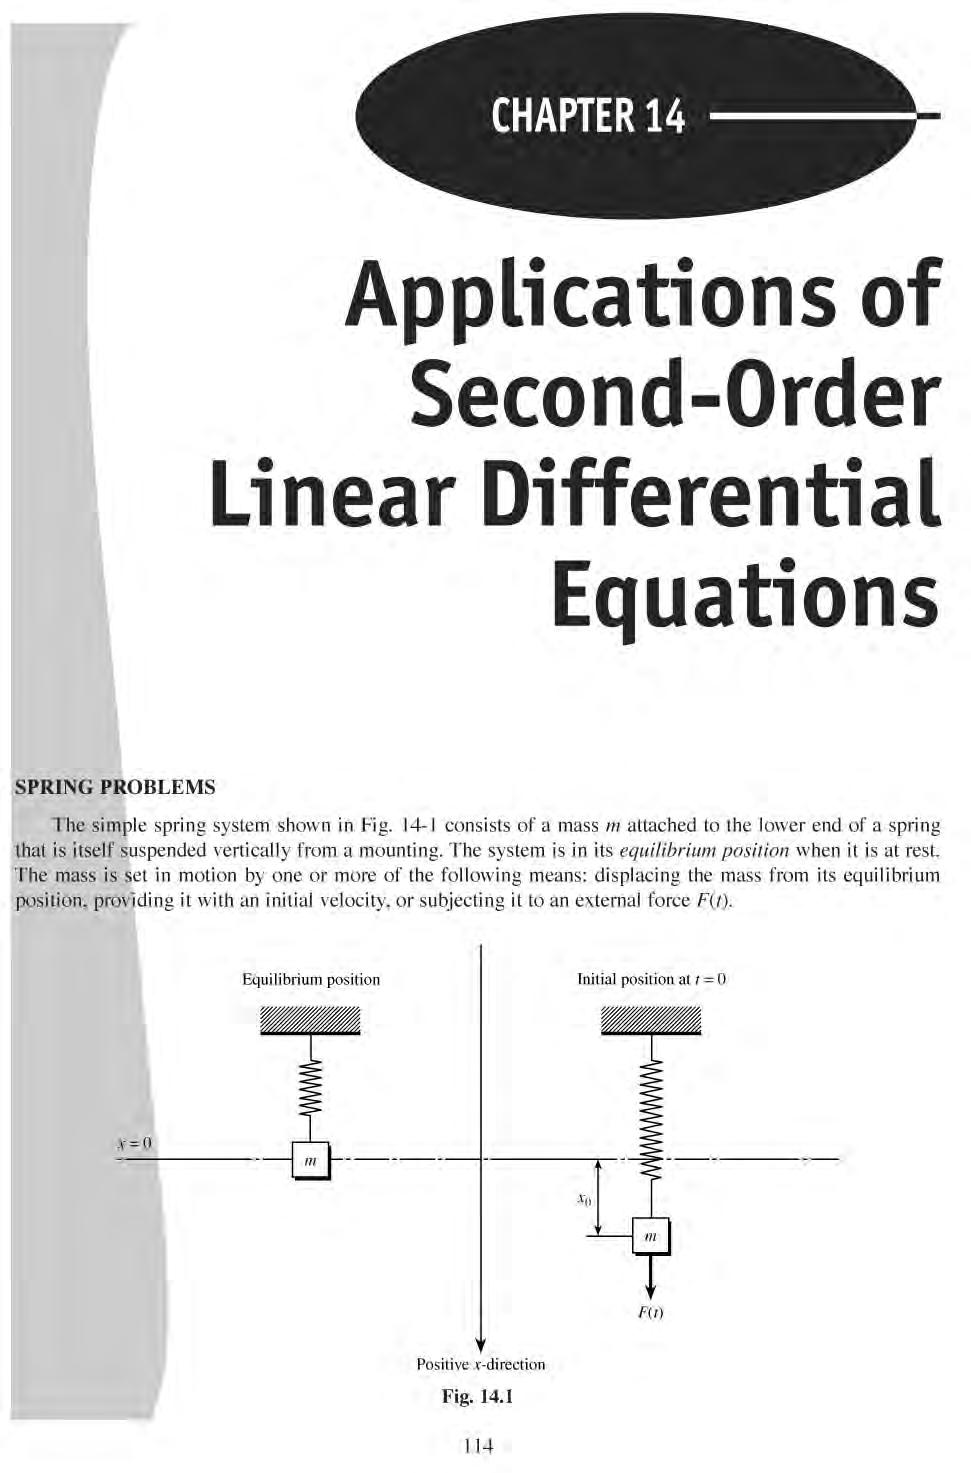 CHAPTER 14 Applications of Second-Order Linear Differential Equations SPRING PROBLEMS The simple spring system shown in Fig. 14-!